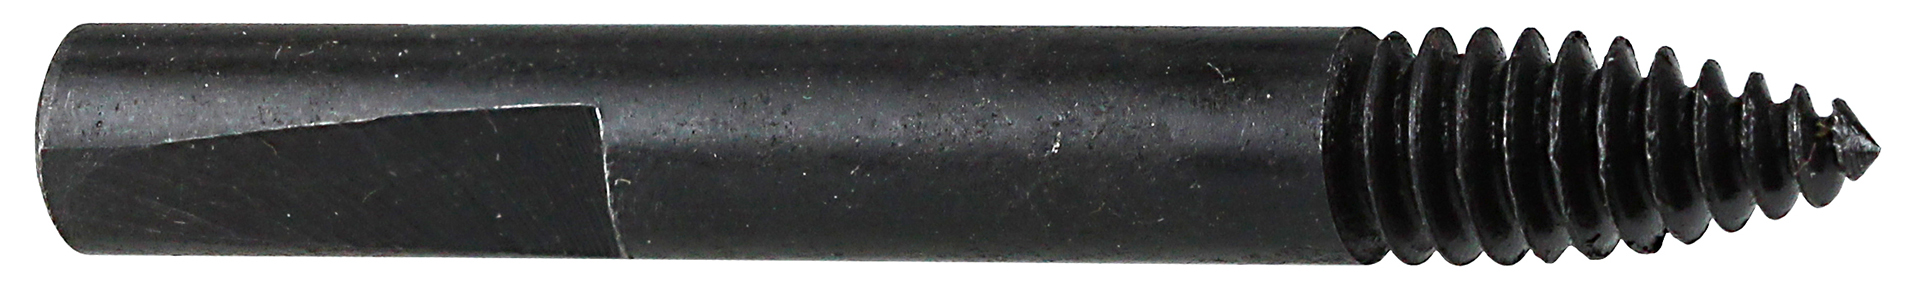 Replacement Screw Point, 2-1/2 in. overall length